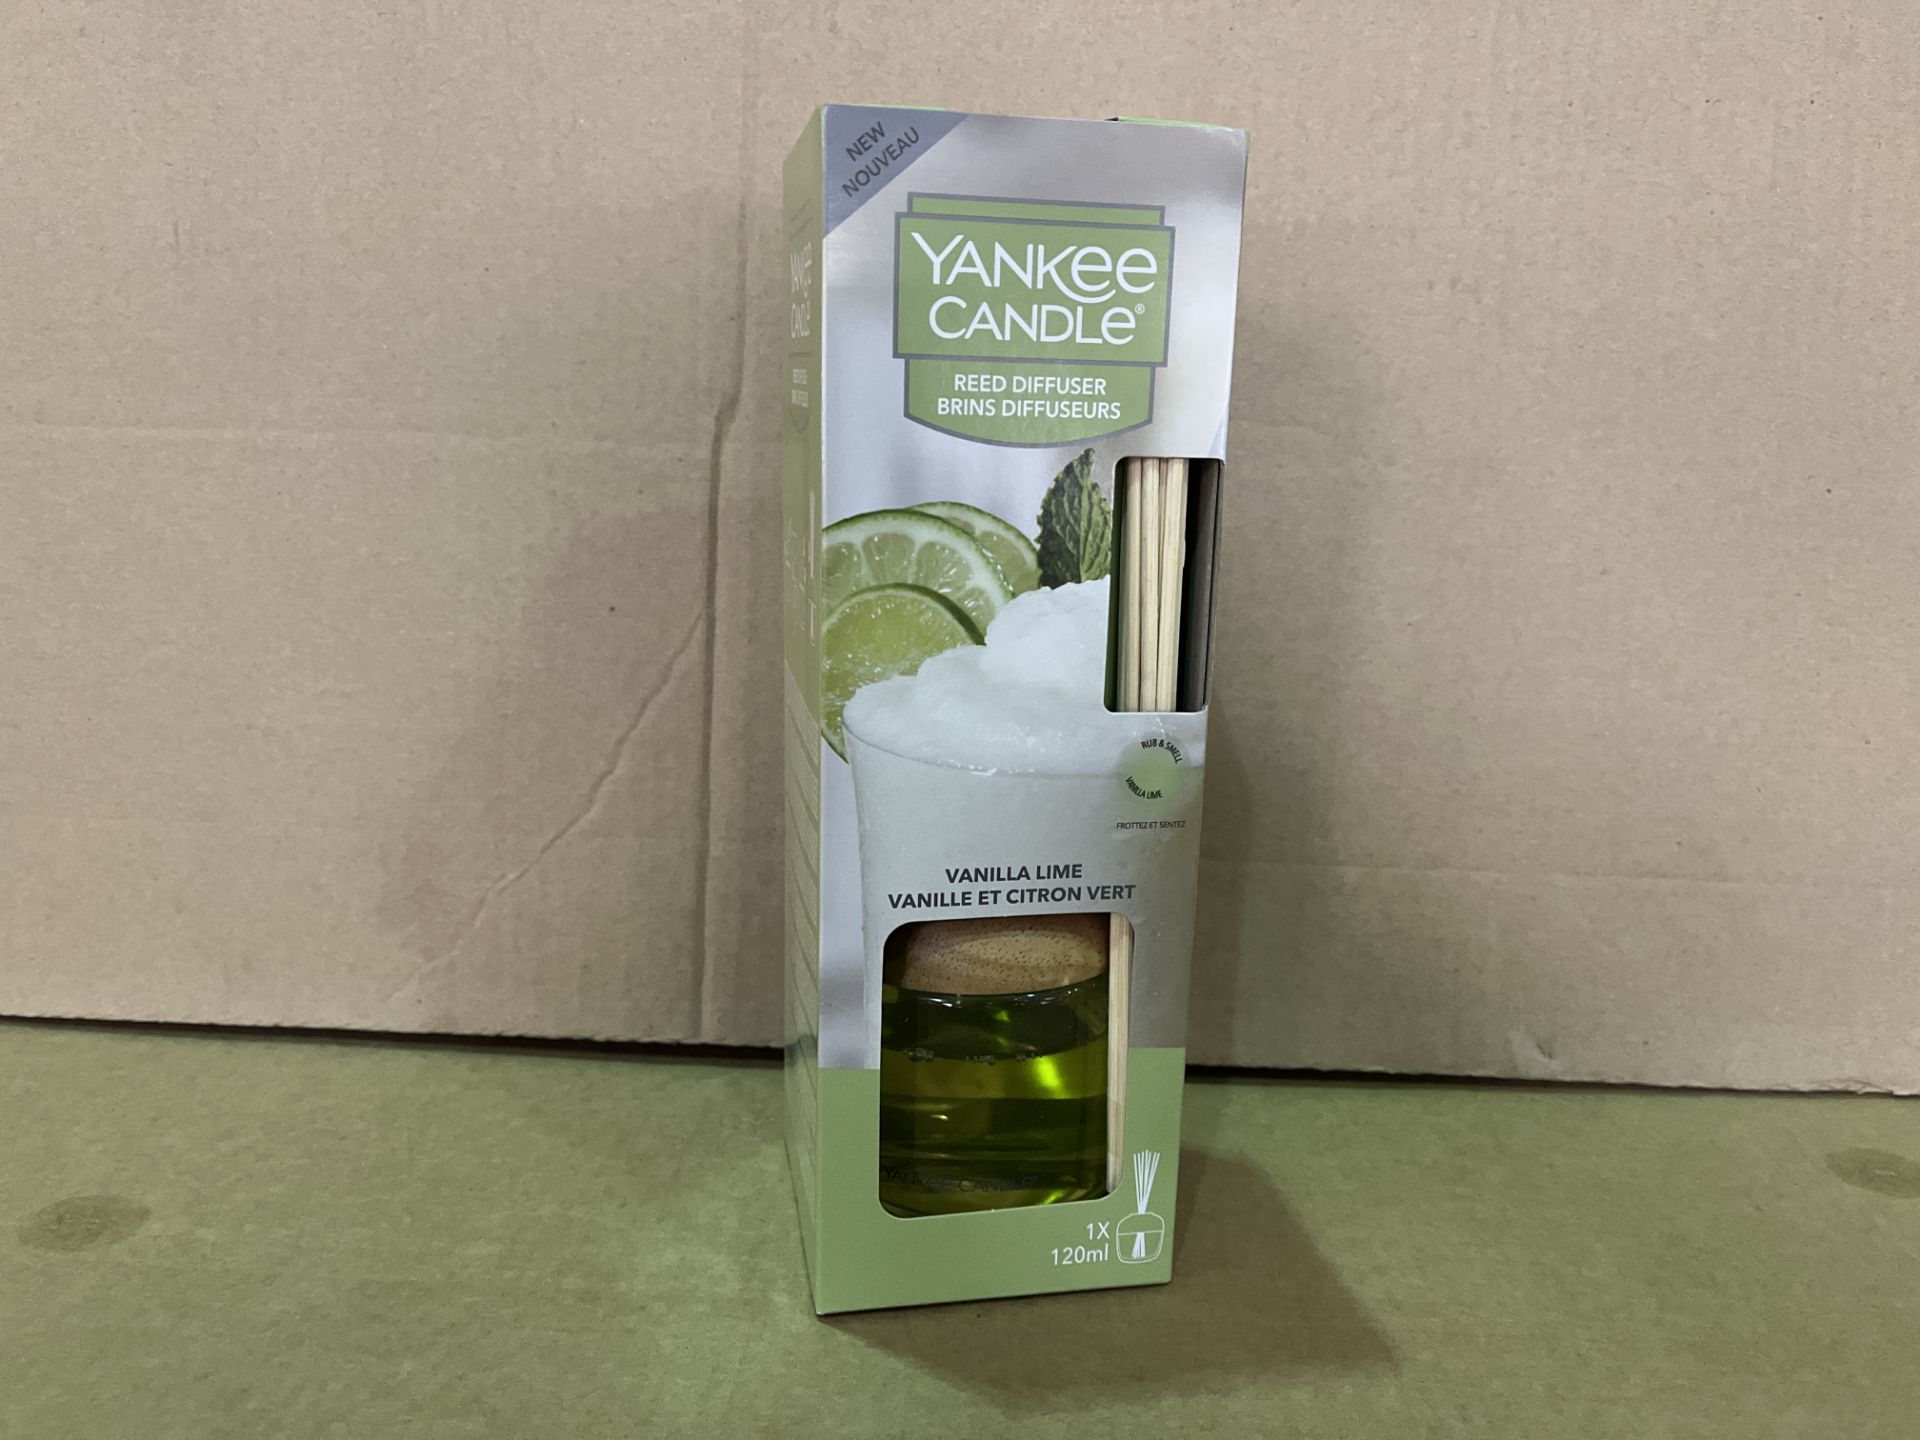 7 X BRAND NEW YANKEE CANDLE VANILLA LIME REED DIFUSERS R15